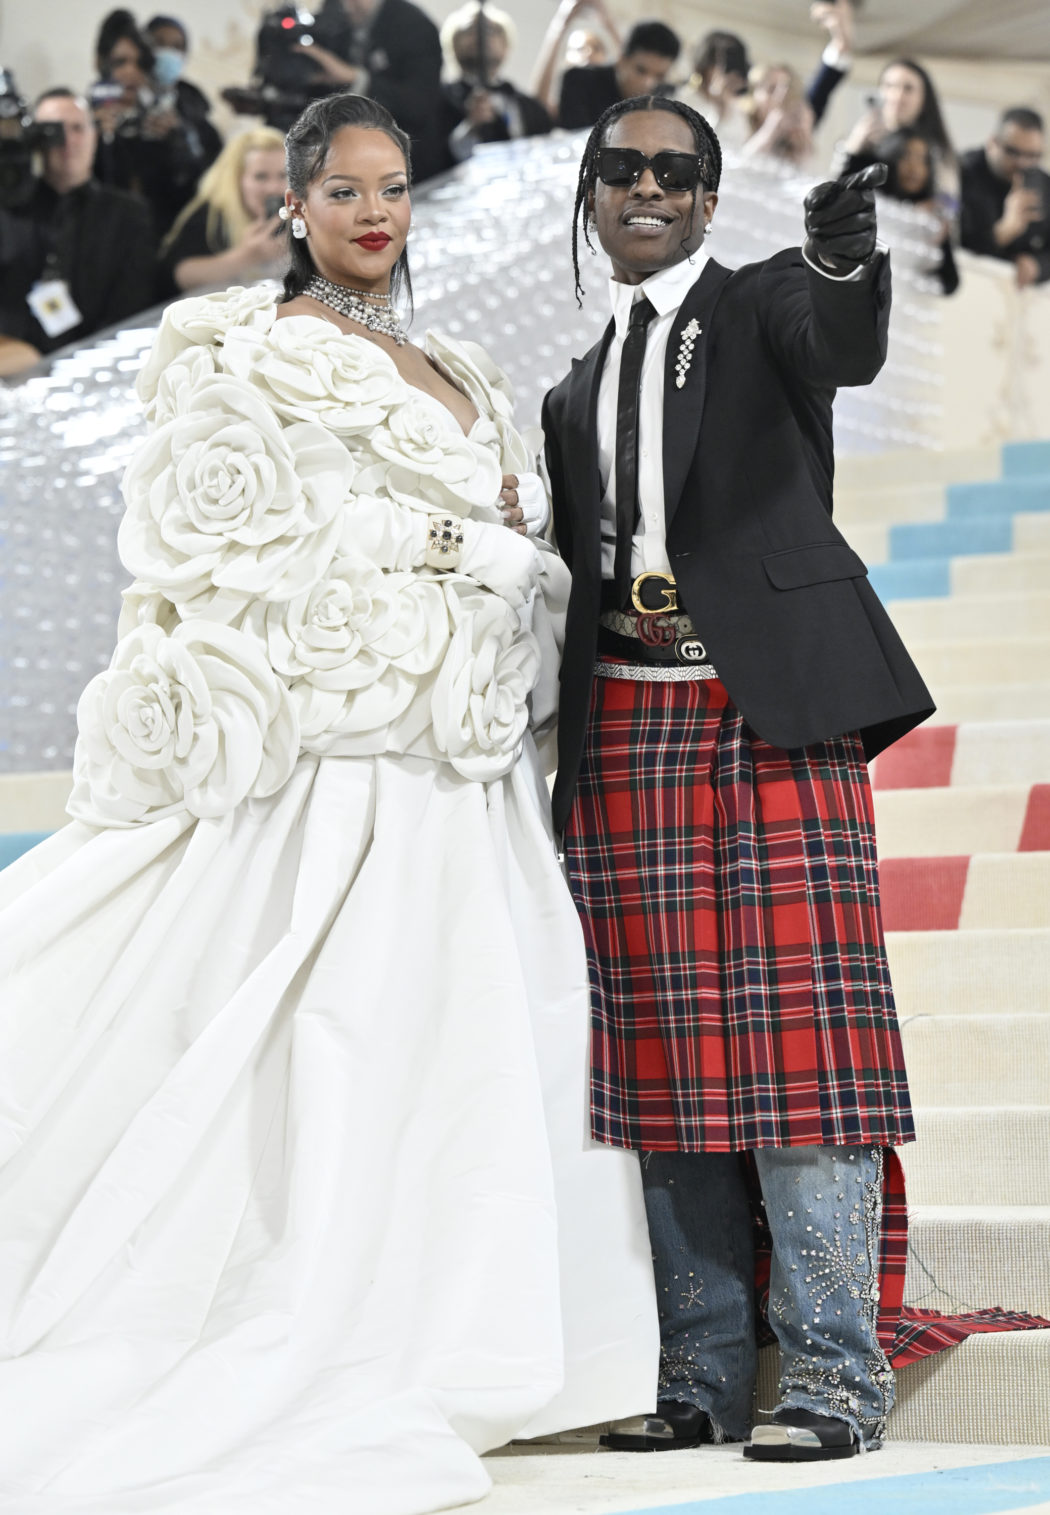 Rihanna, left, and A$AP Rocky attend The Metropolitan Museum of Art’s Costume Institute benefit gala celebrating the opening of the “Karl Lagerfeld: A Line of Beauty” exhibition on Monday, May 1, 2023, in New York. (Photo by Evan Agostini/Invision/AP)

Associated Press/LaPresse
Only Italy and Spain